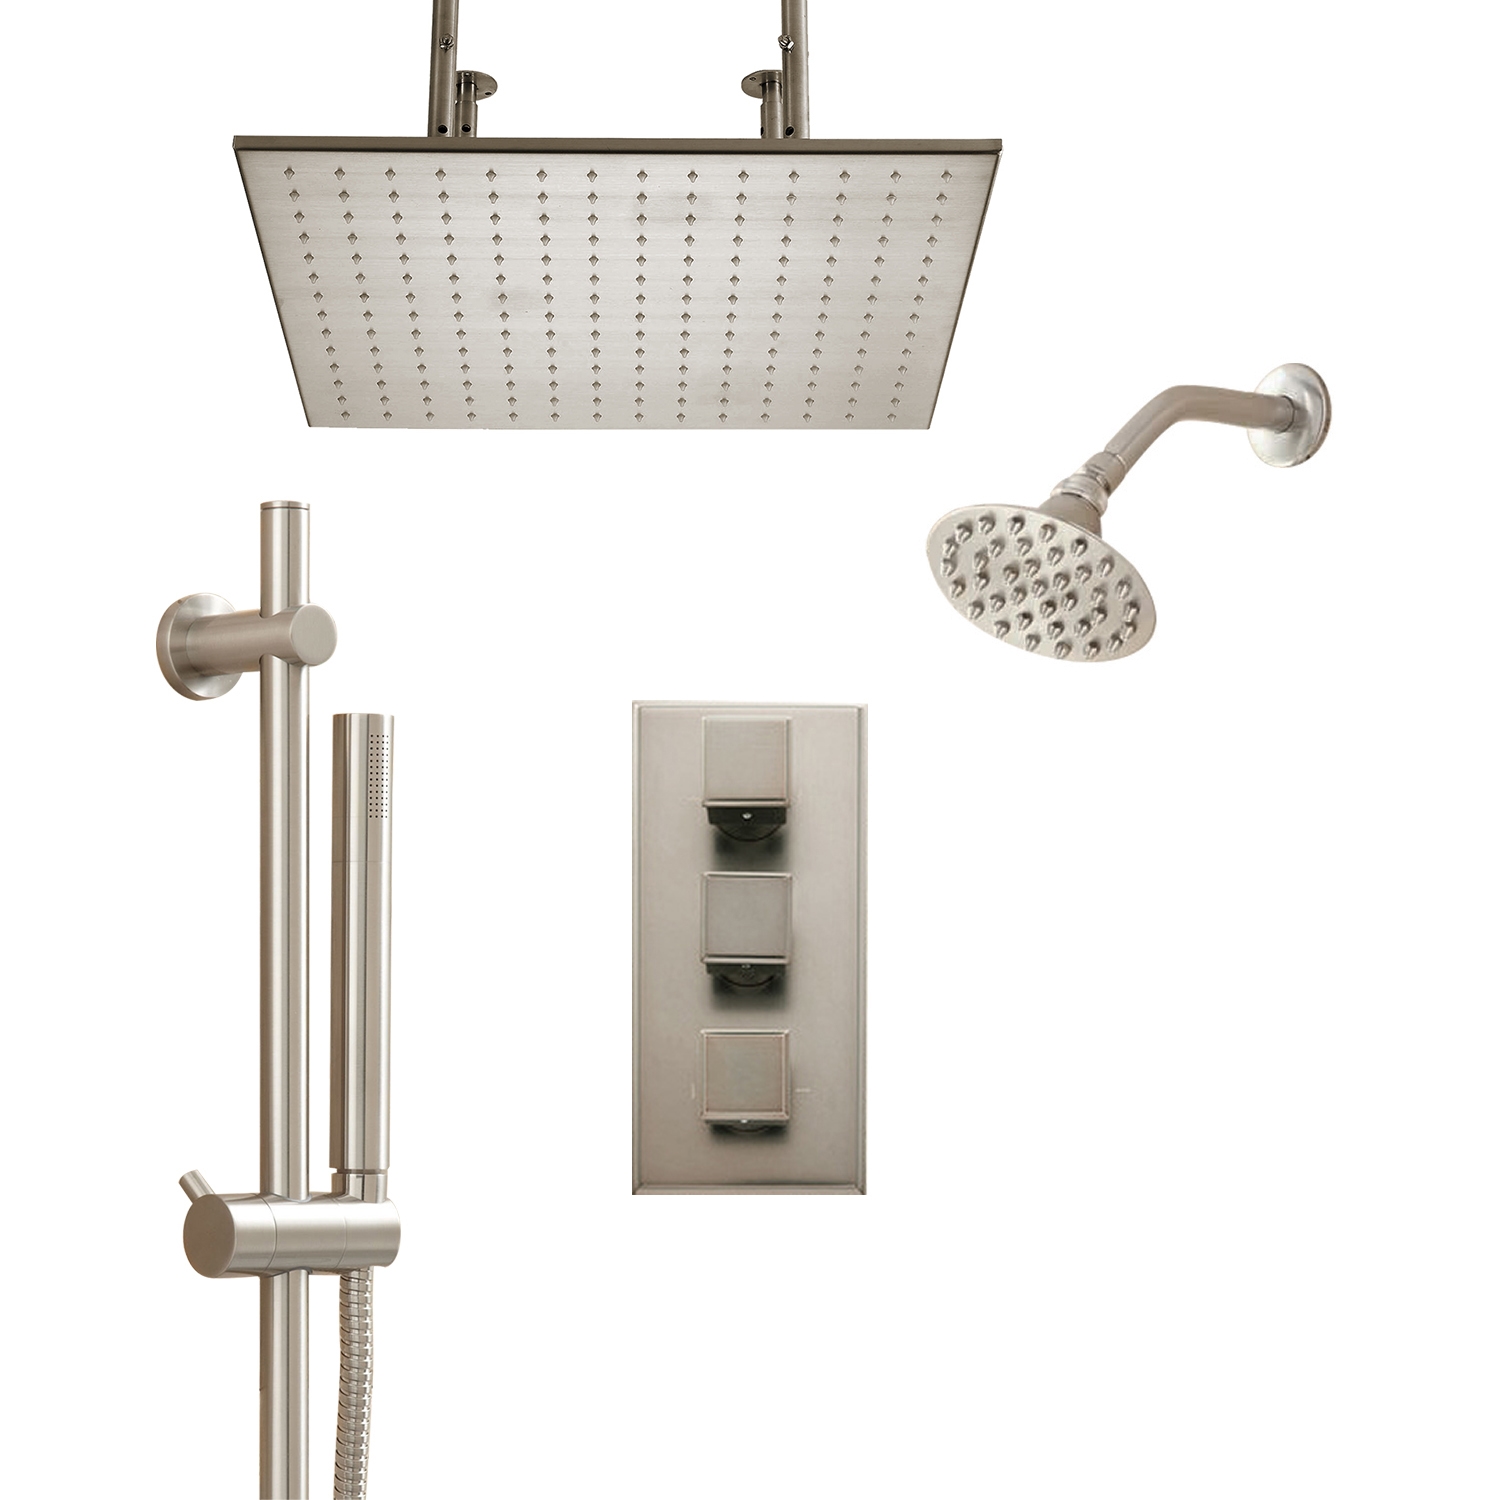 Brushed Nickel Ceiling Mount Rainfall Dual Shower Head Set With Handshower